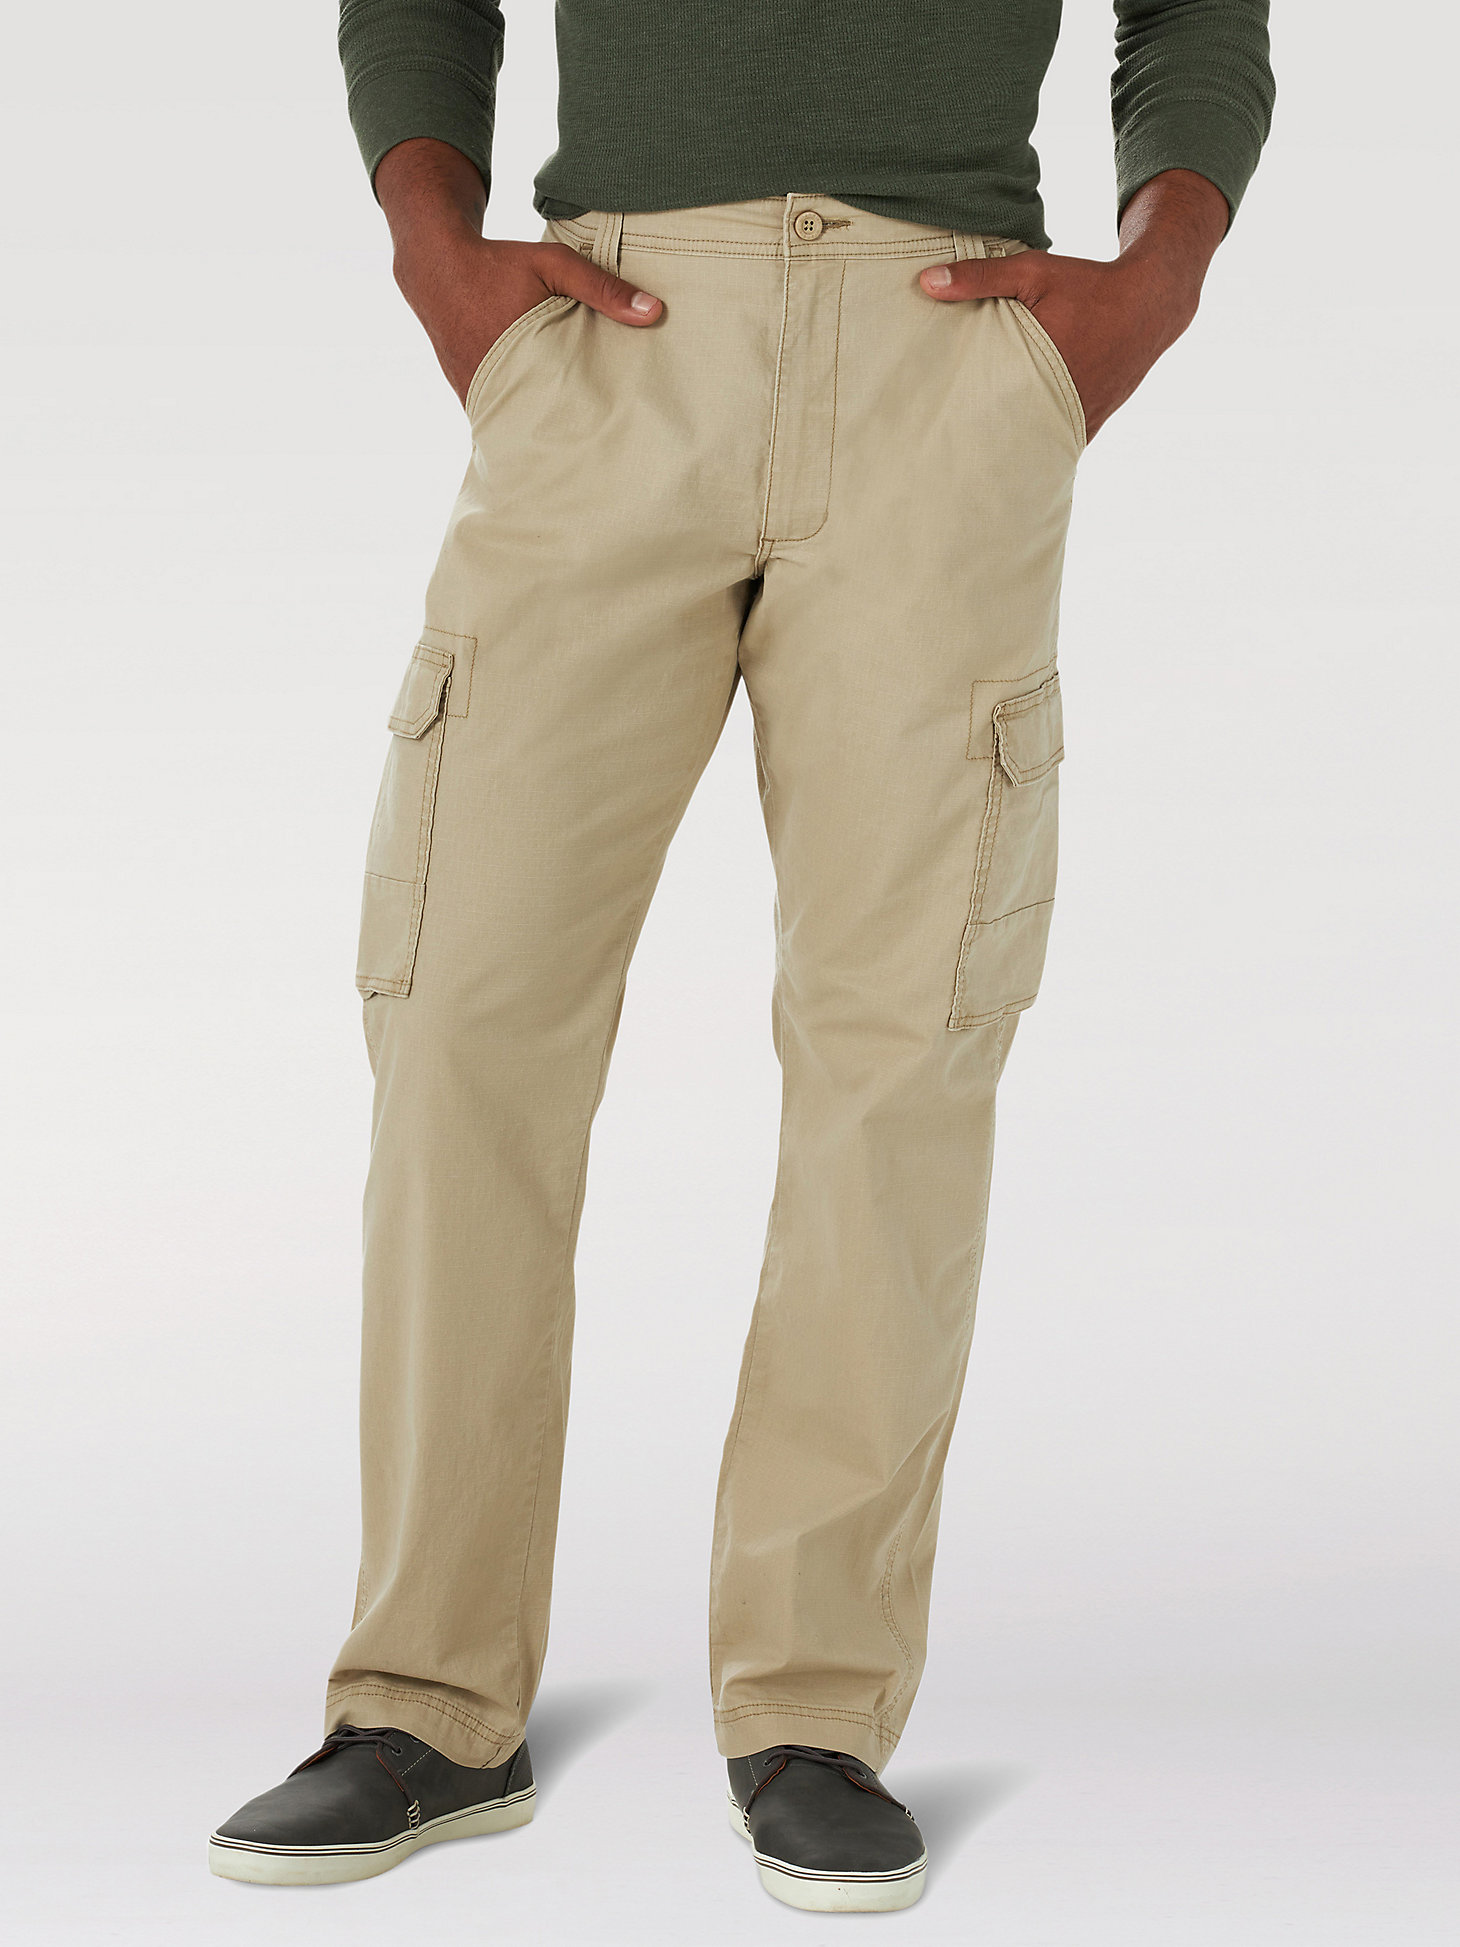 Arena jealousy Fable Men's Cargo Pant